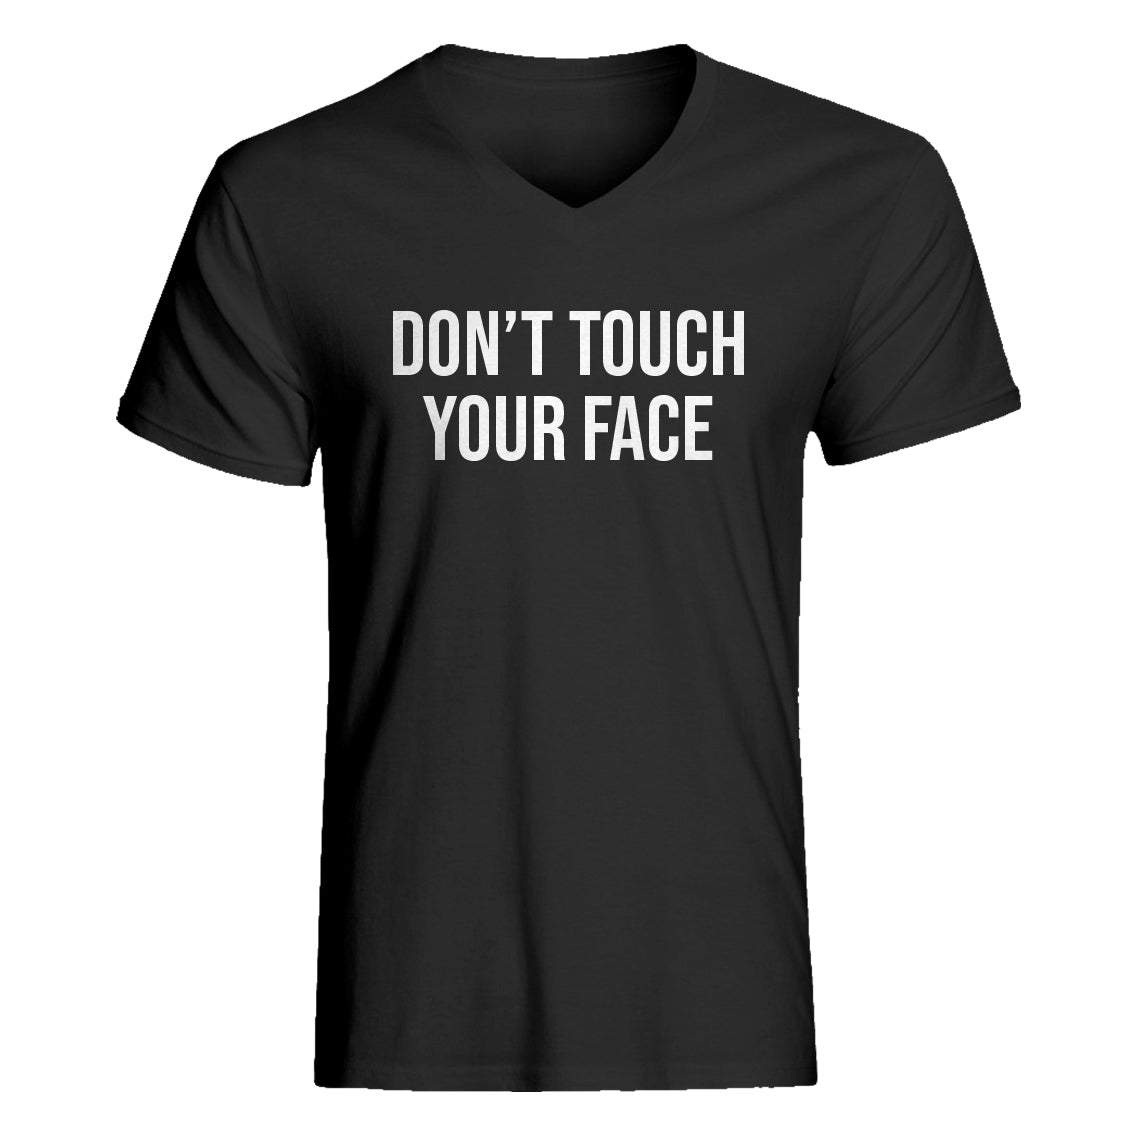 Mens DON'T TOUCH YOUR FACE V-Neck T-shirt